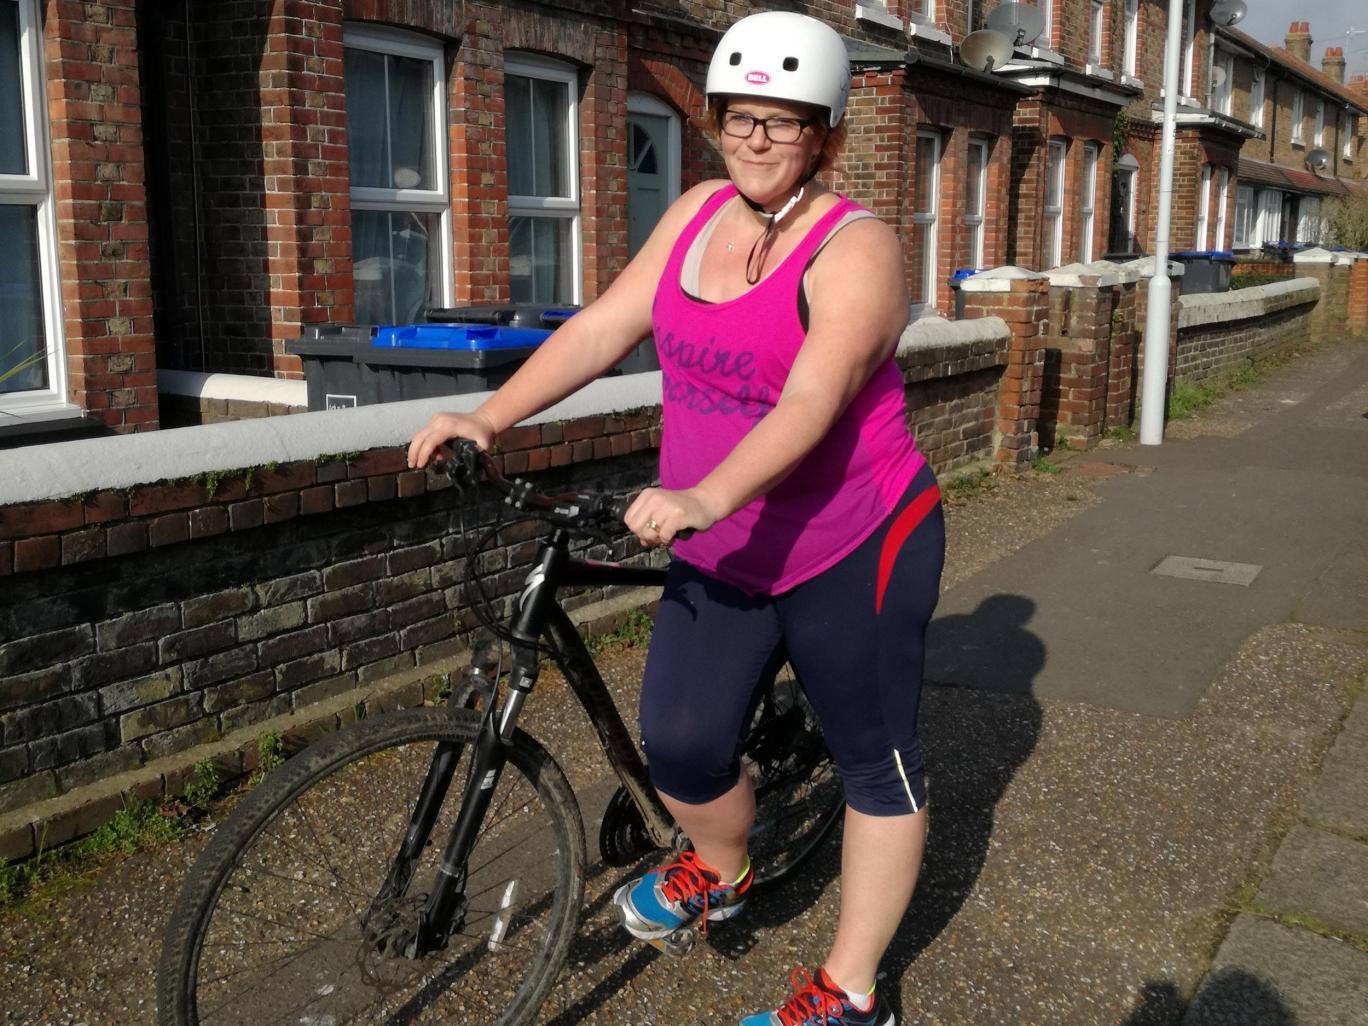 "I'm doing it for my health, my family and to raise as much money as I can for the BHF," says Amy Thorley